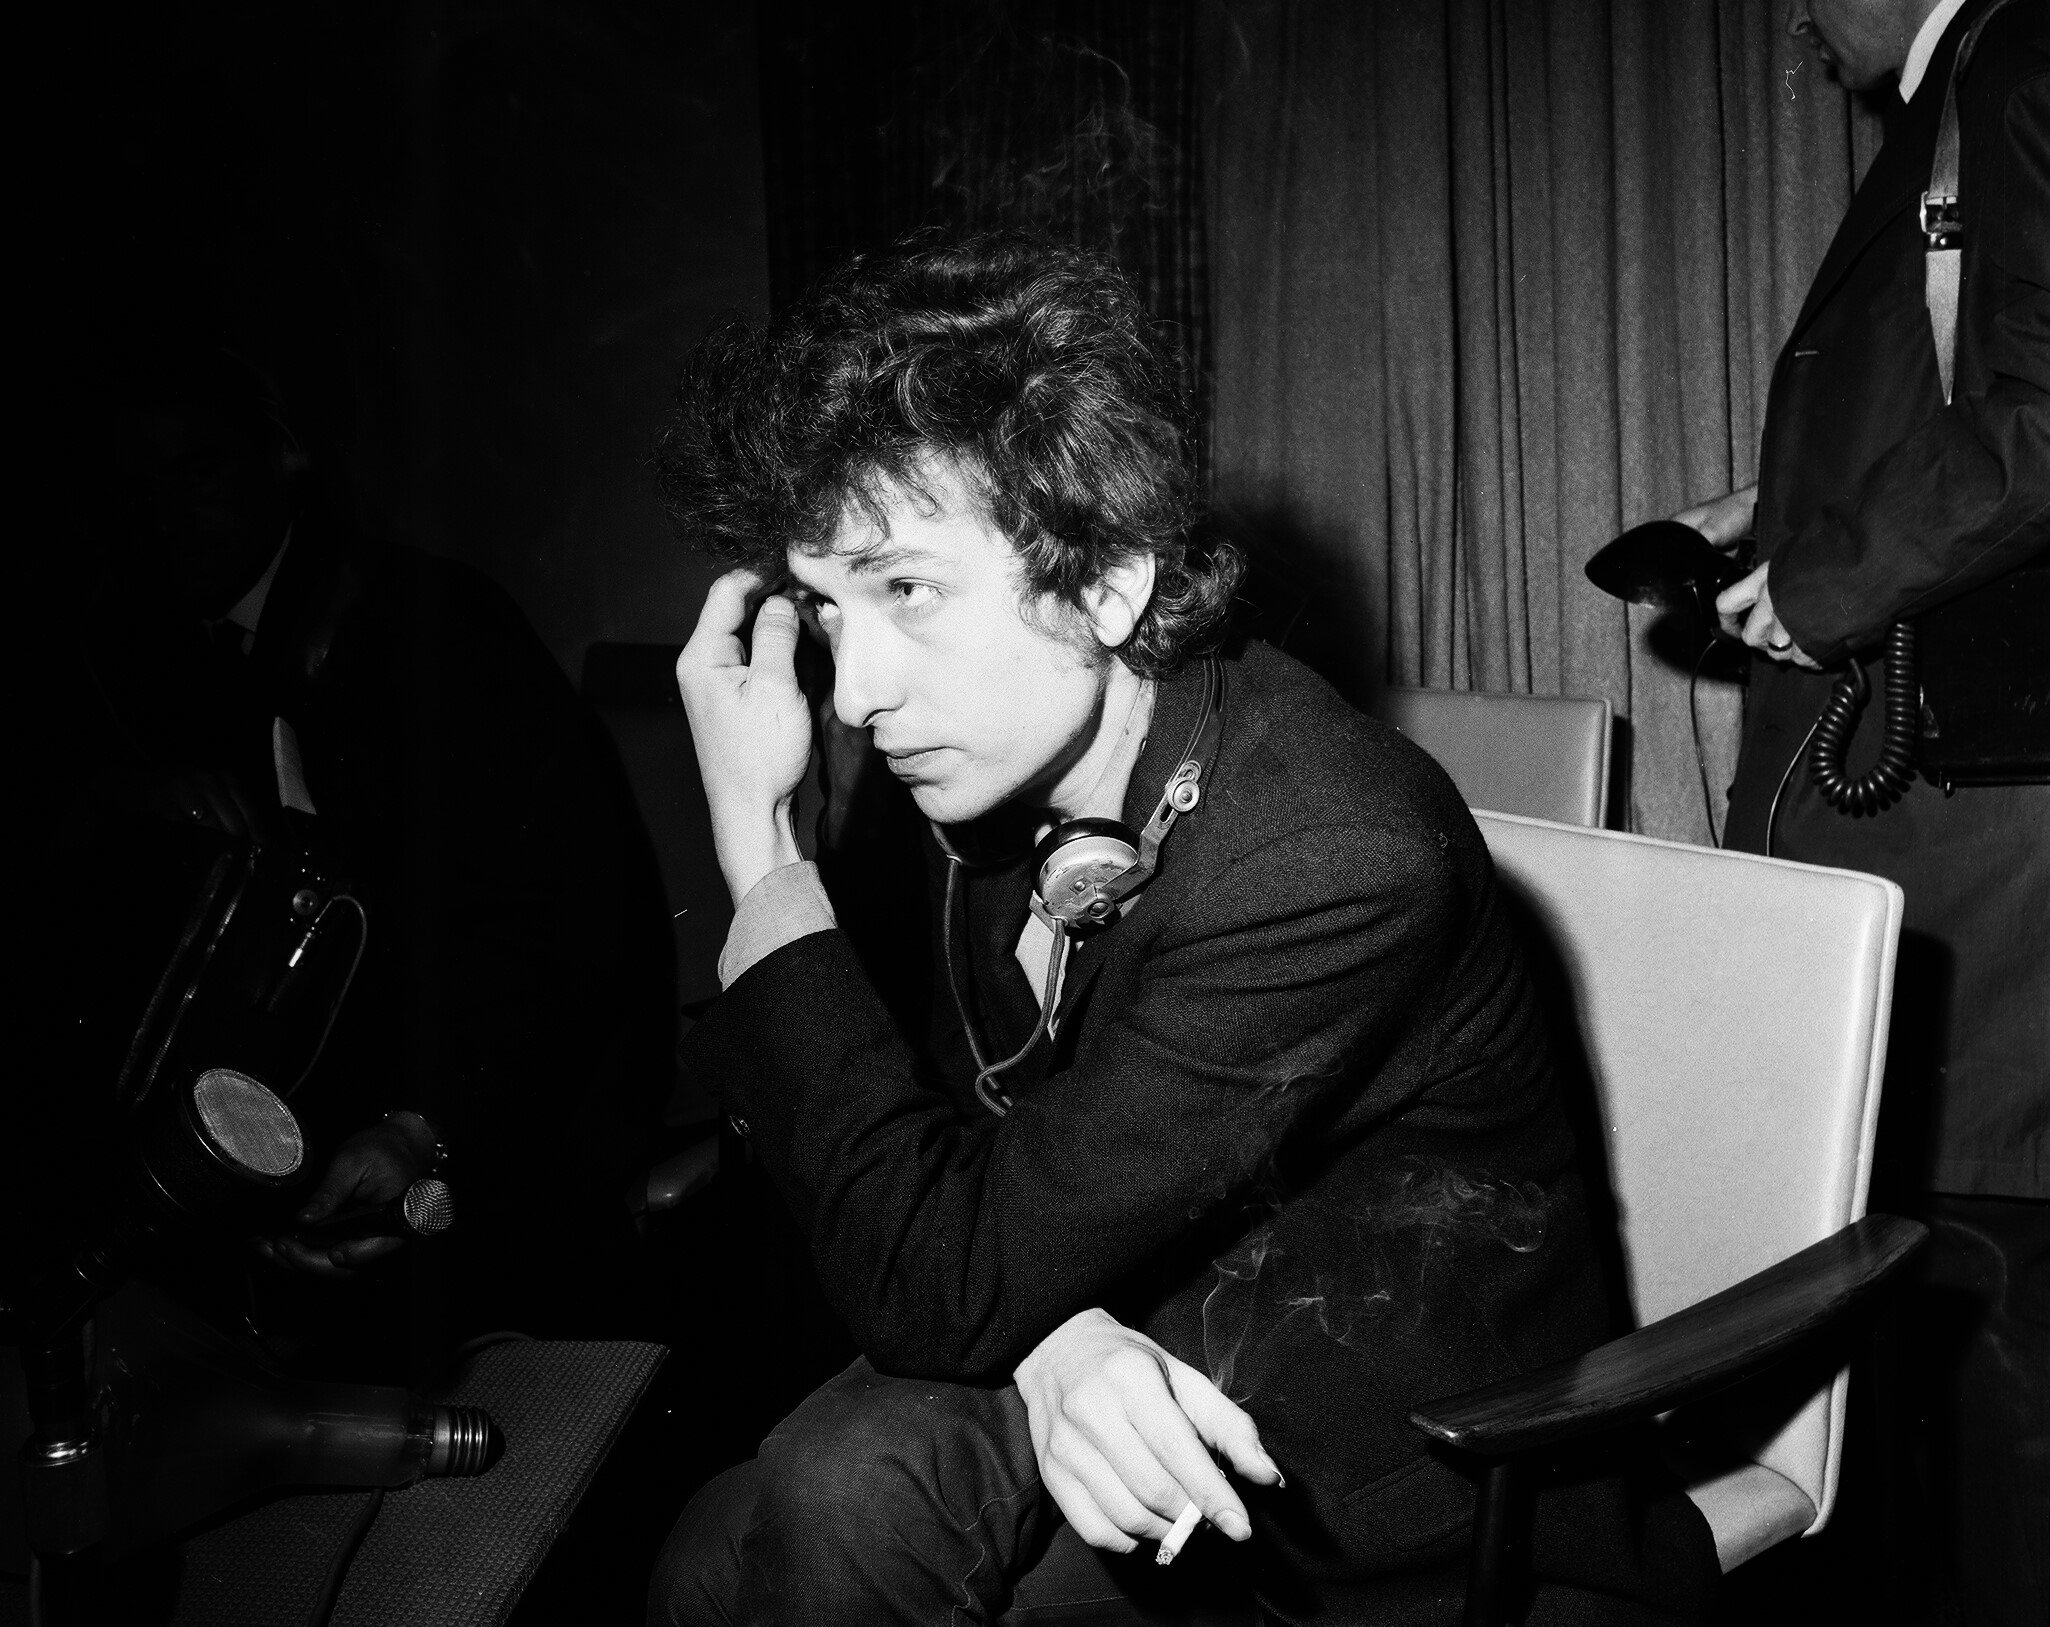 Bob Dylan Got Booed While Accepting an Award: ‘They Looked at Me Like I Was an Animal’